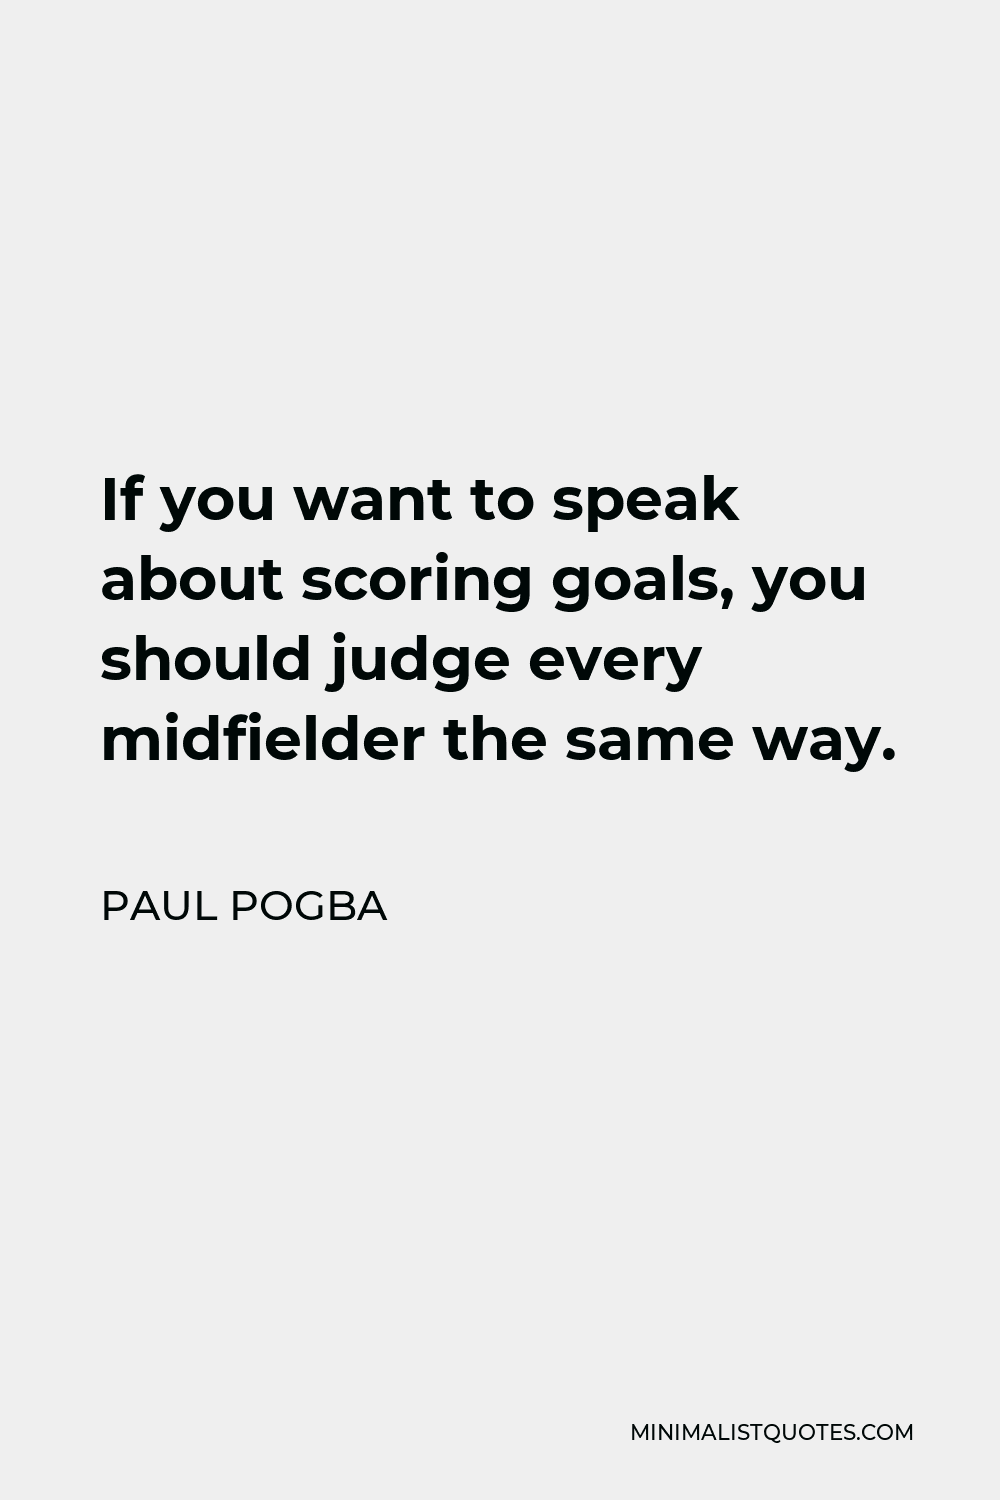 Paul Pogba Quote - If you want to speak about scoring goals, you should judge every midfielder the same way.